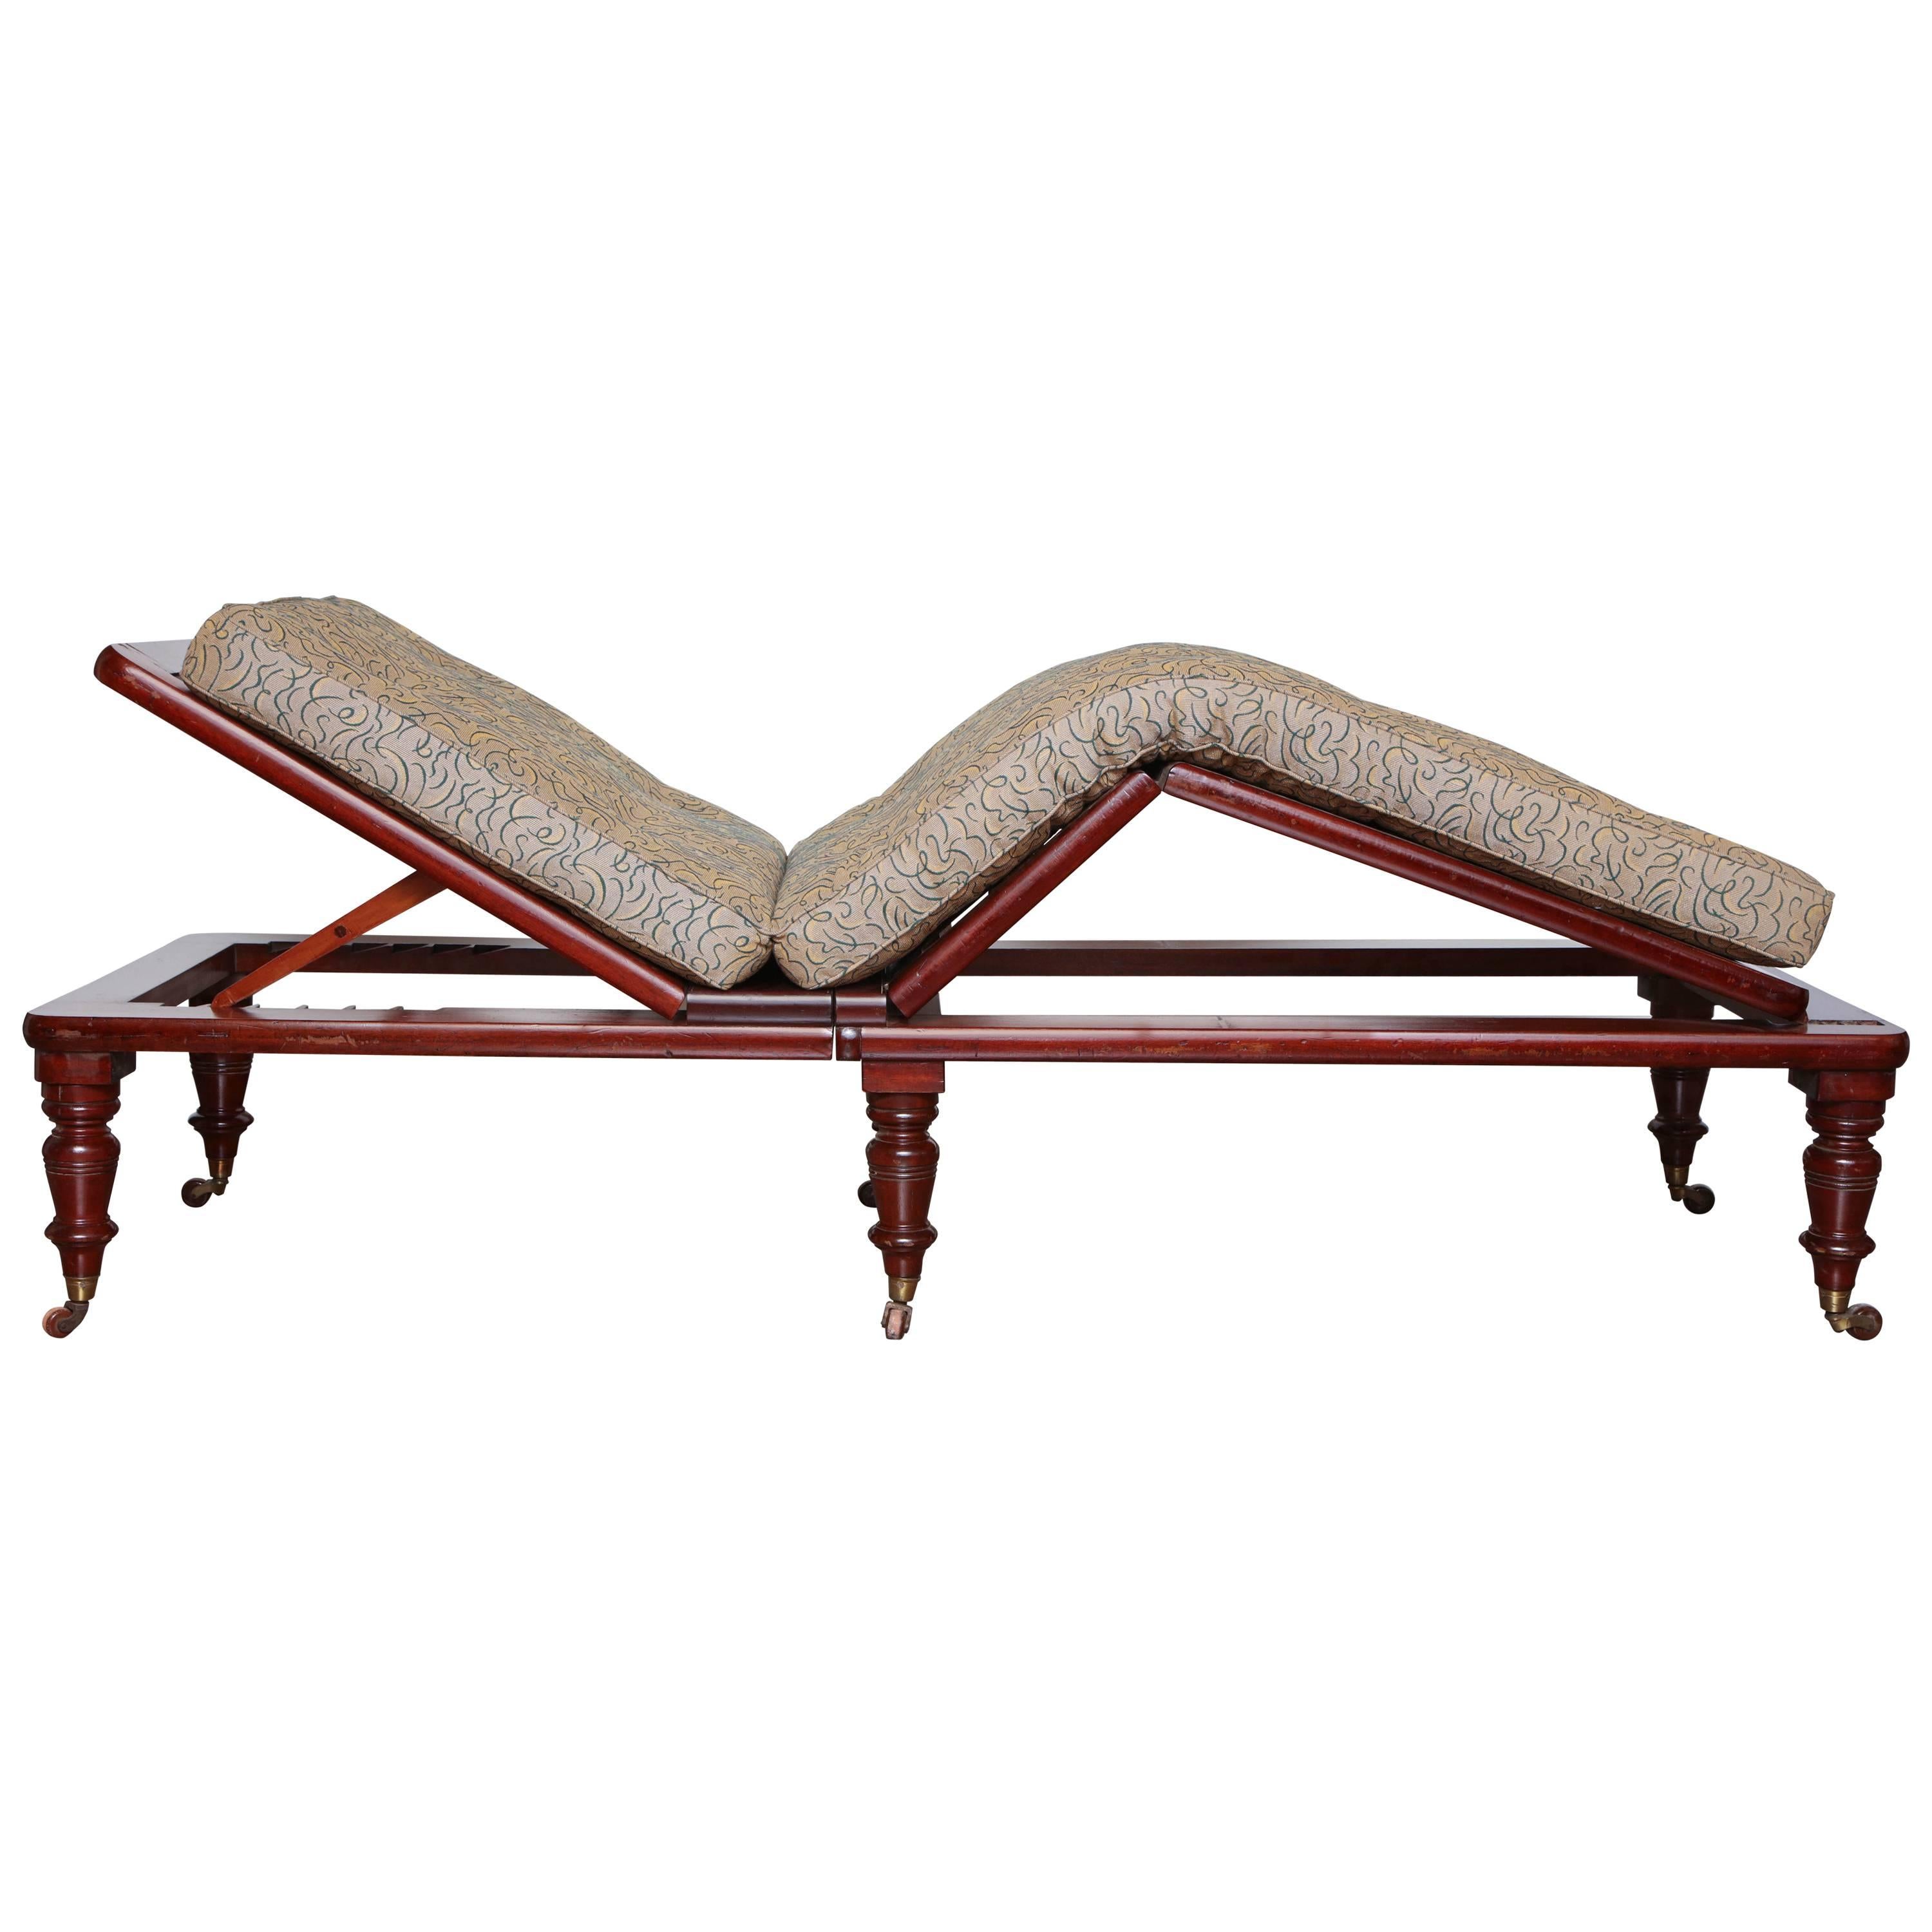 Mid-19th Century English, Mahogany Articulated Campaign Chaise